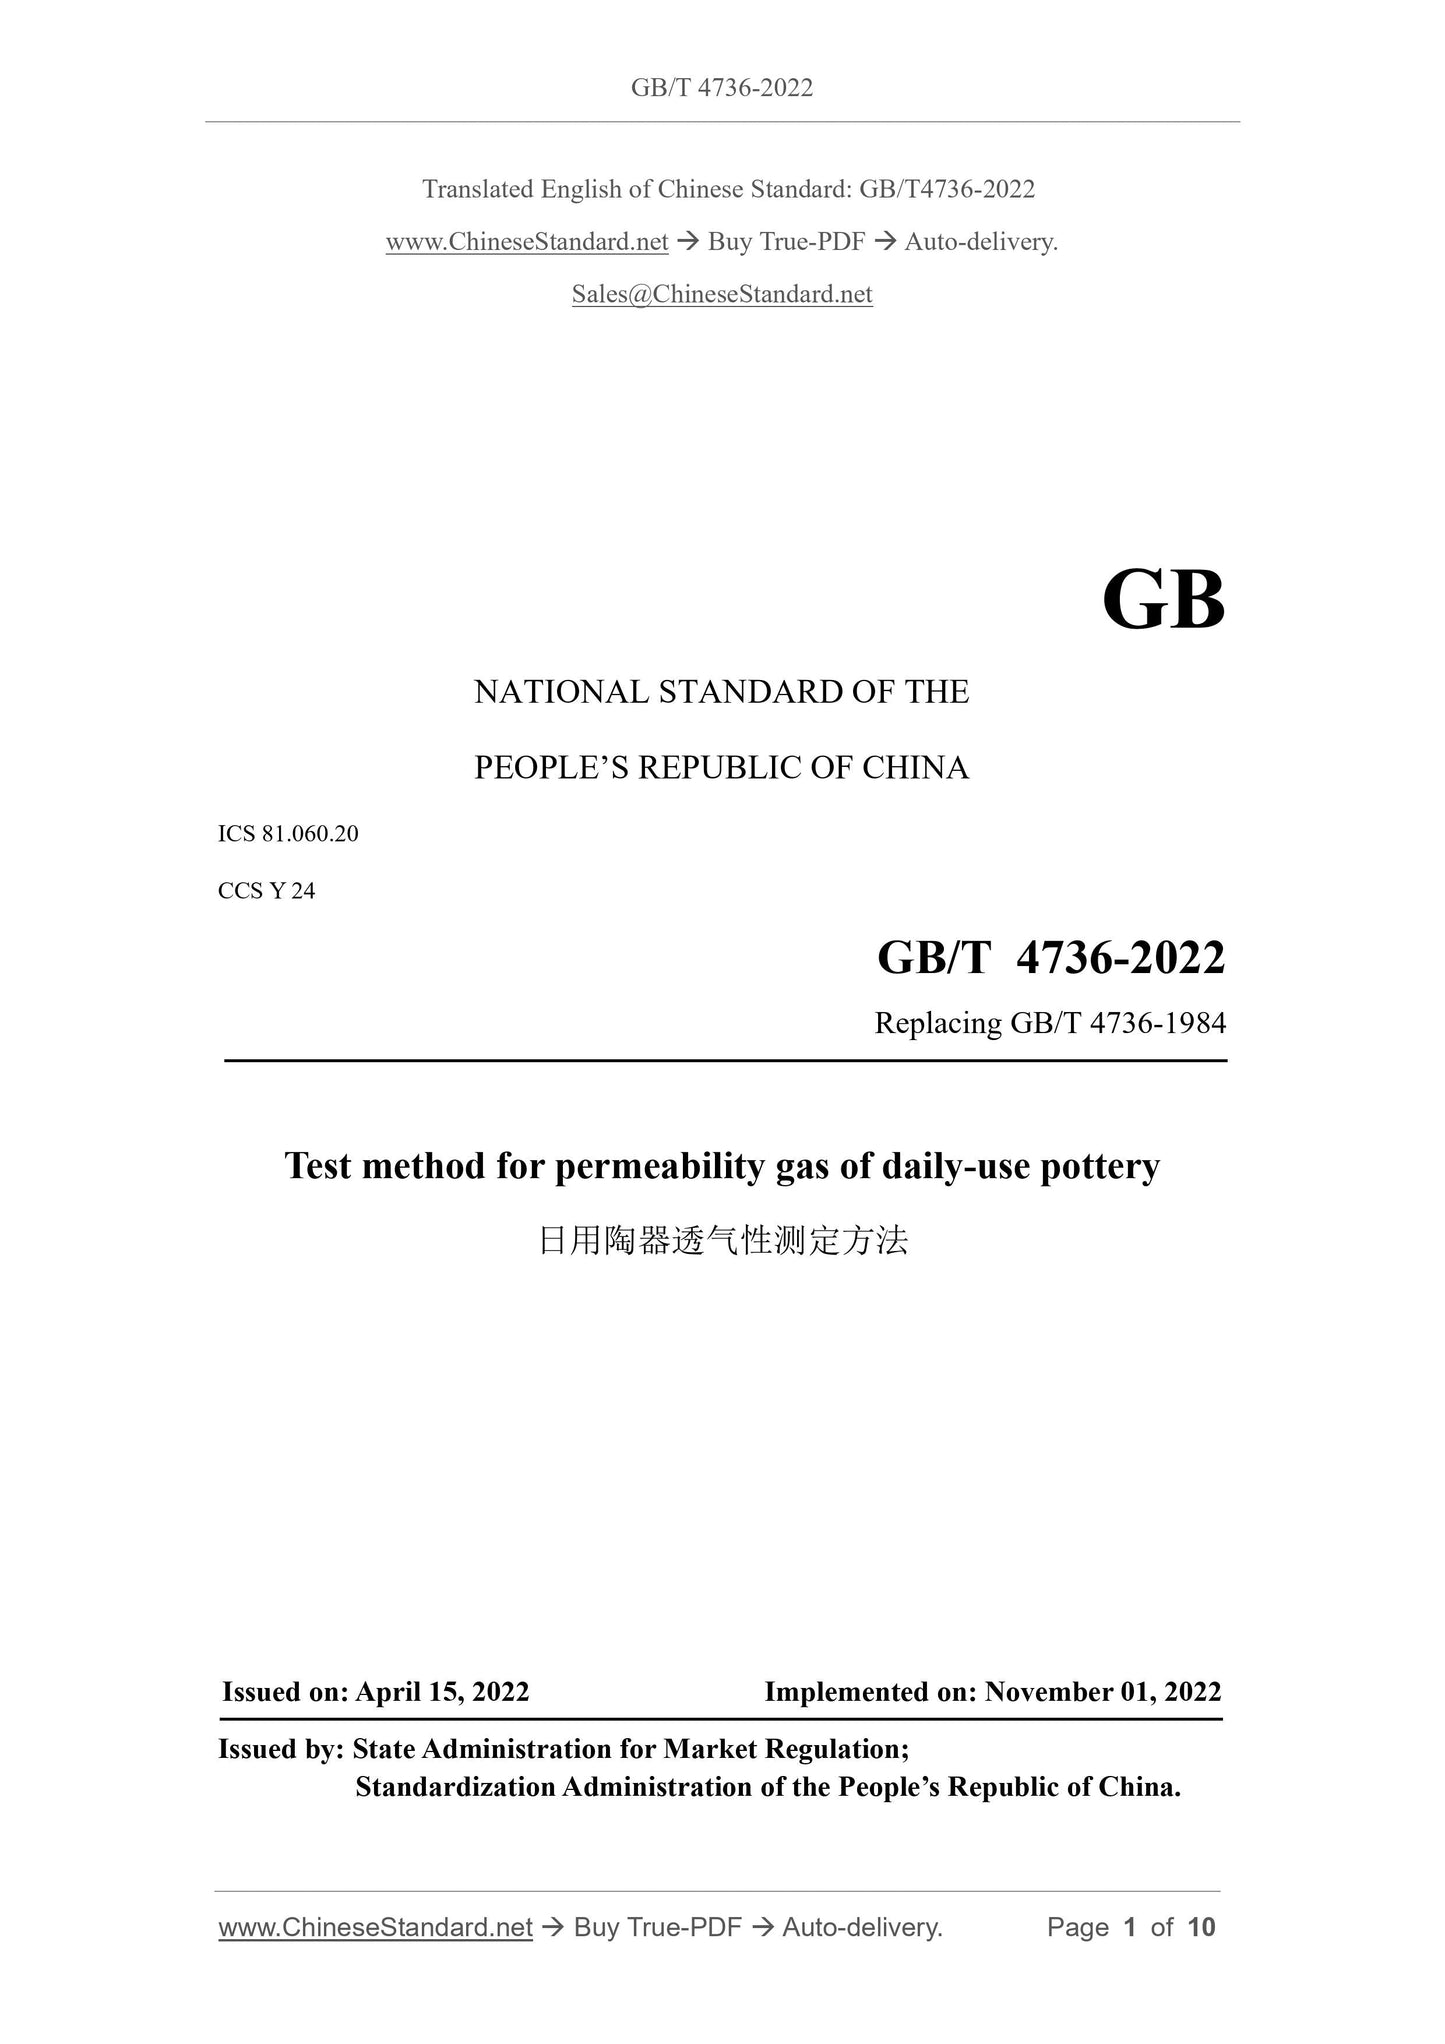 GB/T 4736-2022 Page 1